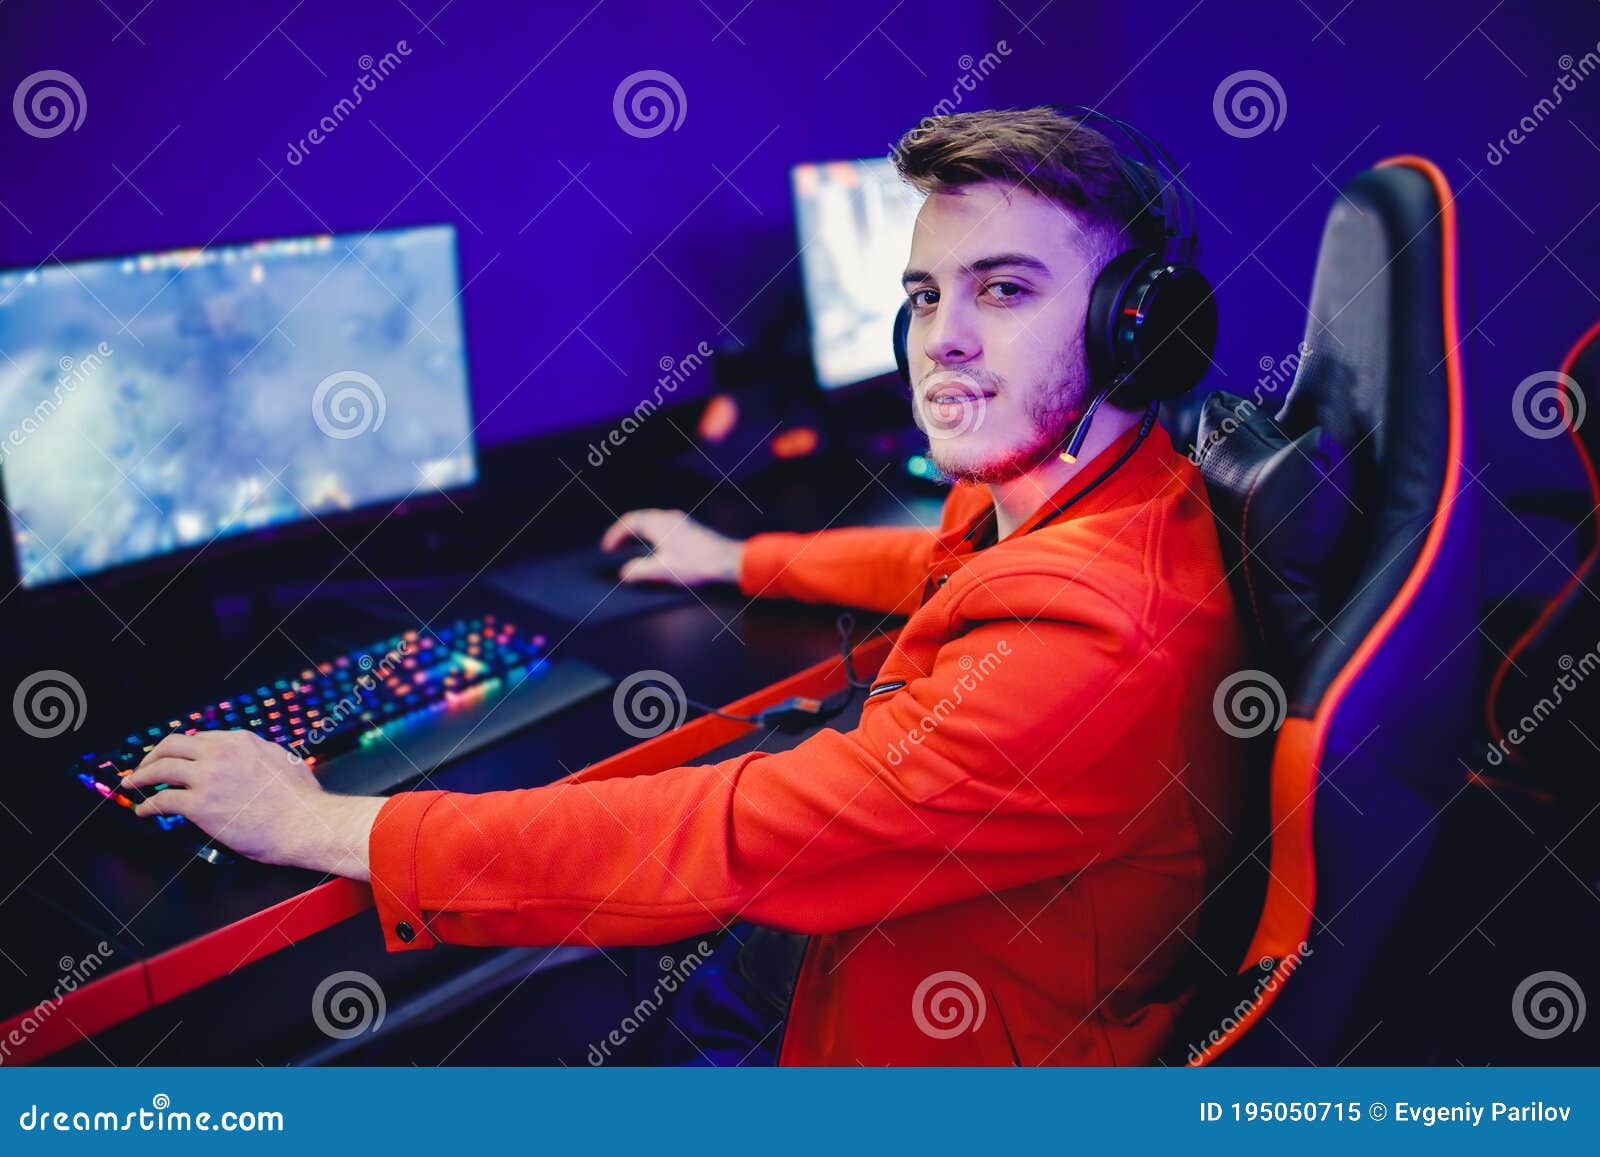 Professional Gamer Playing Tournaments Online Video Games Computer with Headphones, Red and Blue Stock Image